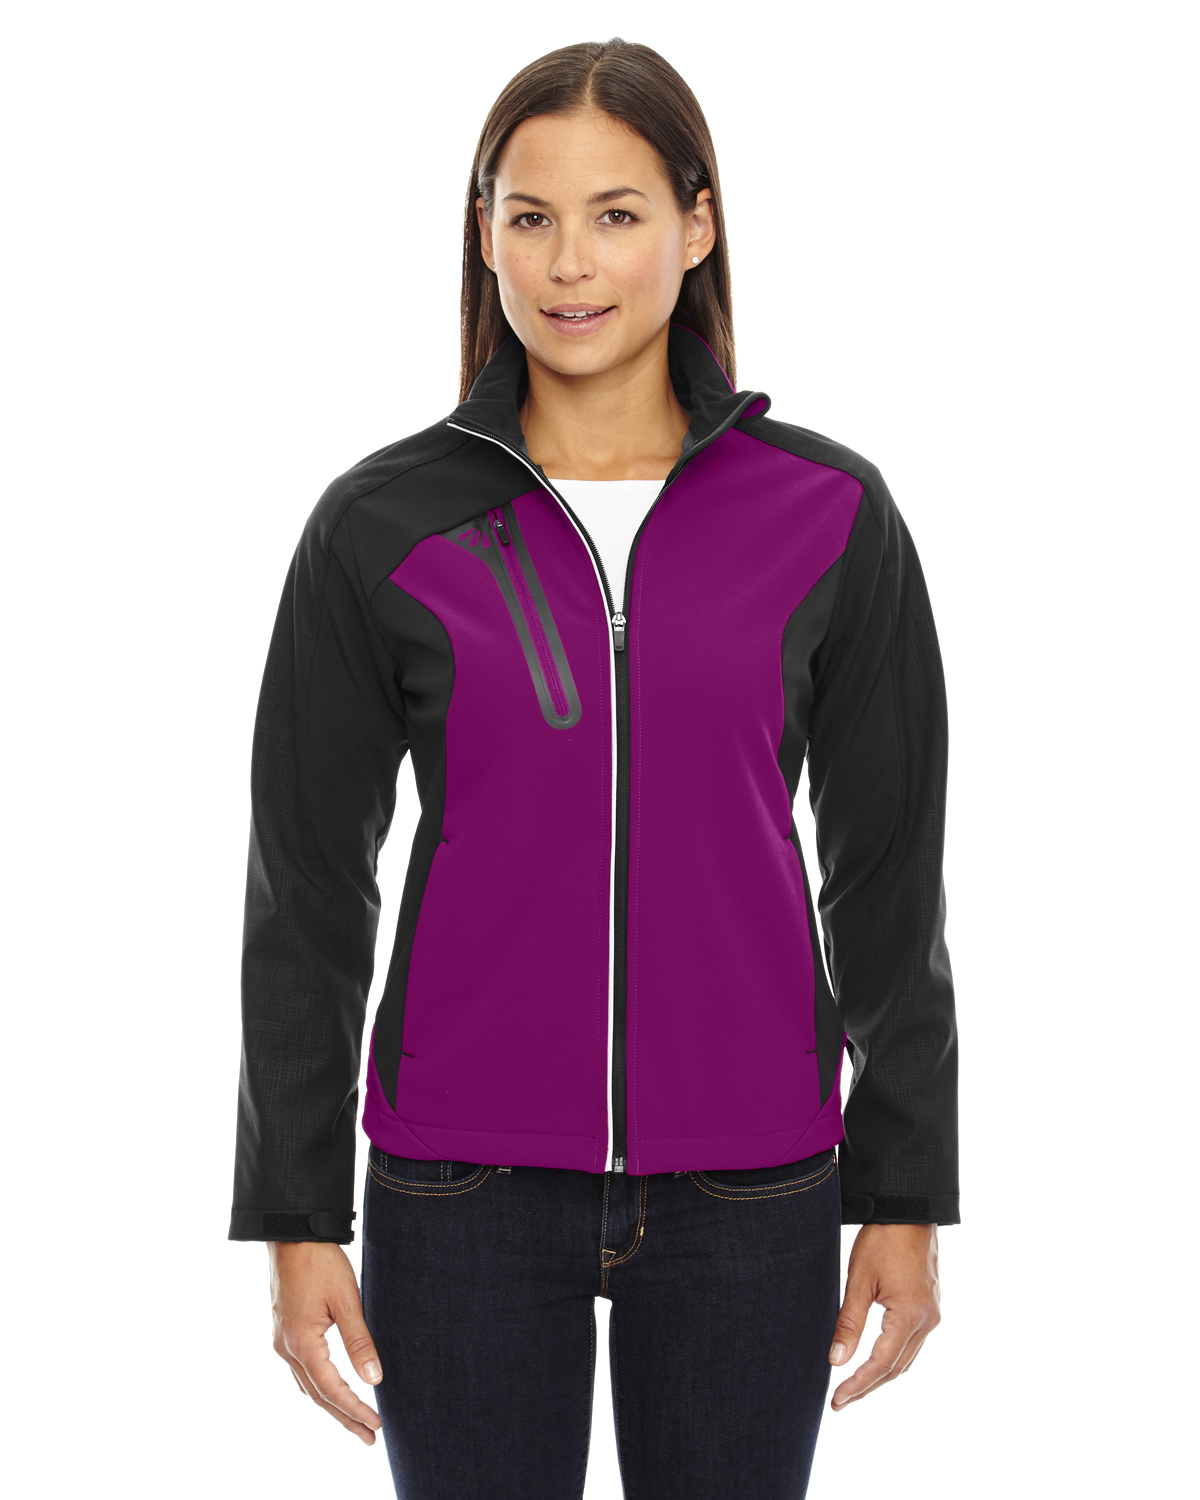 The Ash City - North End Ladies' Terrain Colorblock Soft Shell with Embossed Print - RASPBERRY 455 - S - image 1 of 2